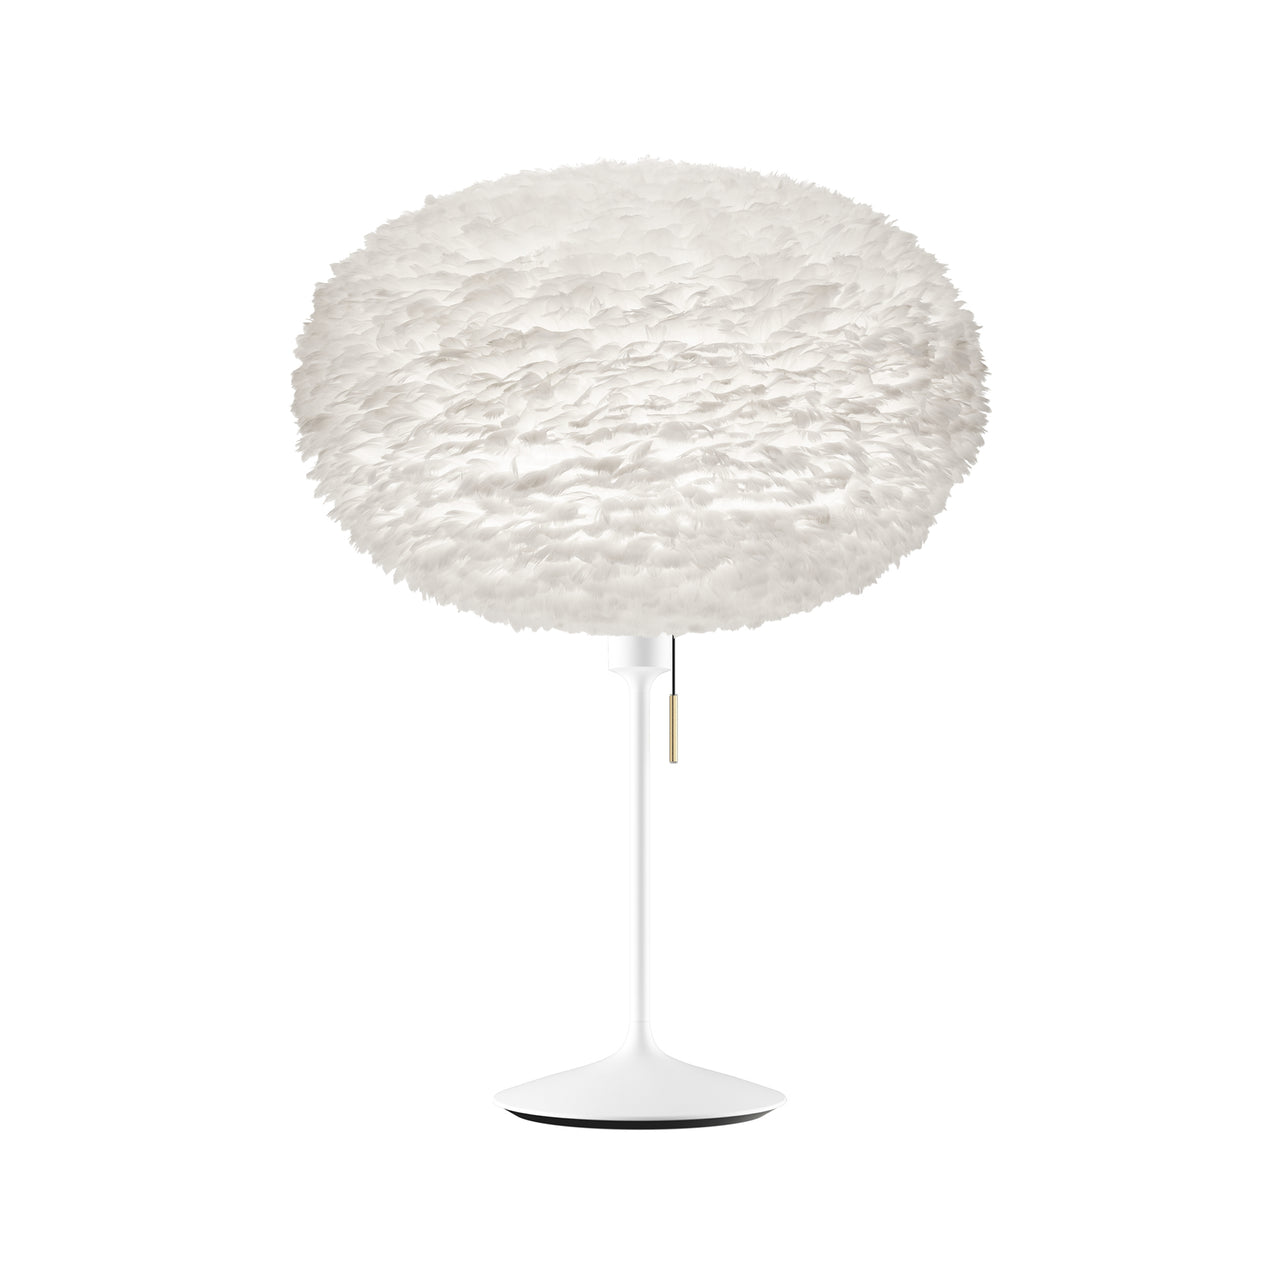 Eos Champagne Table Lamp: XXL - 43.3